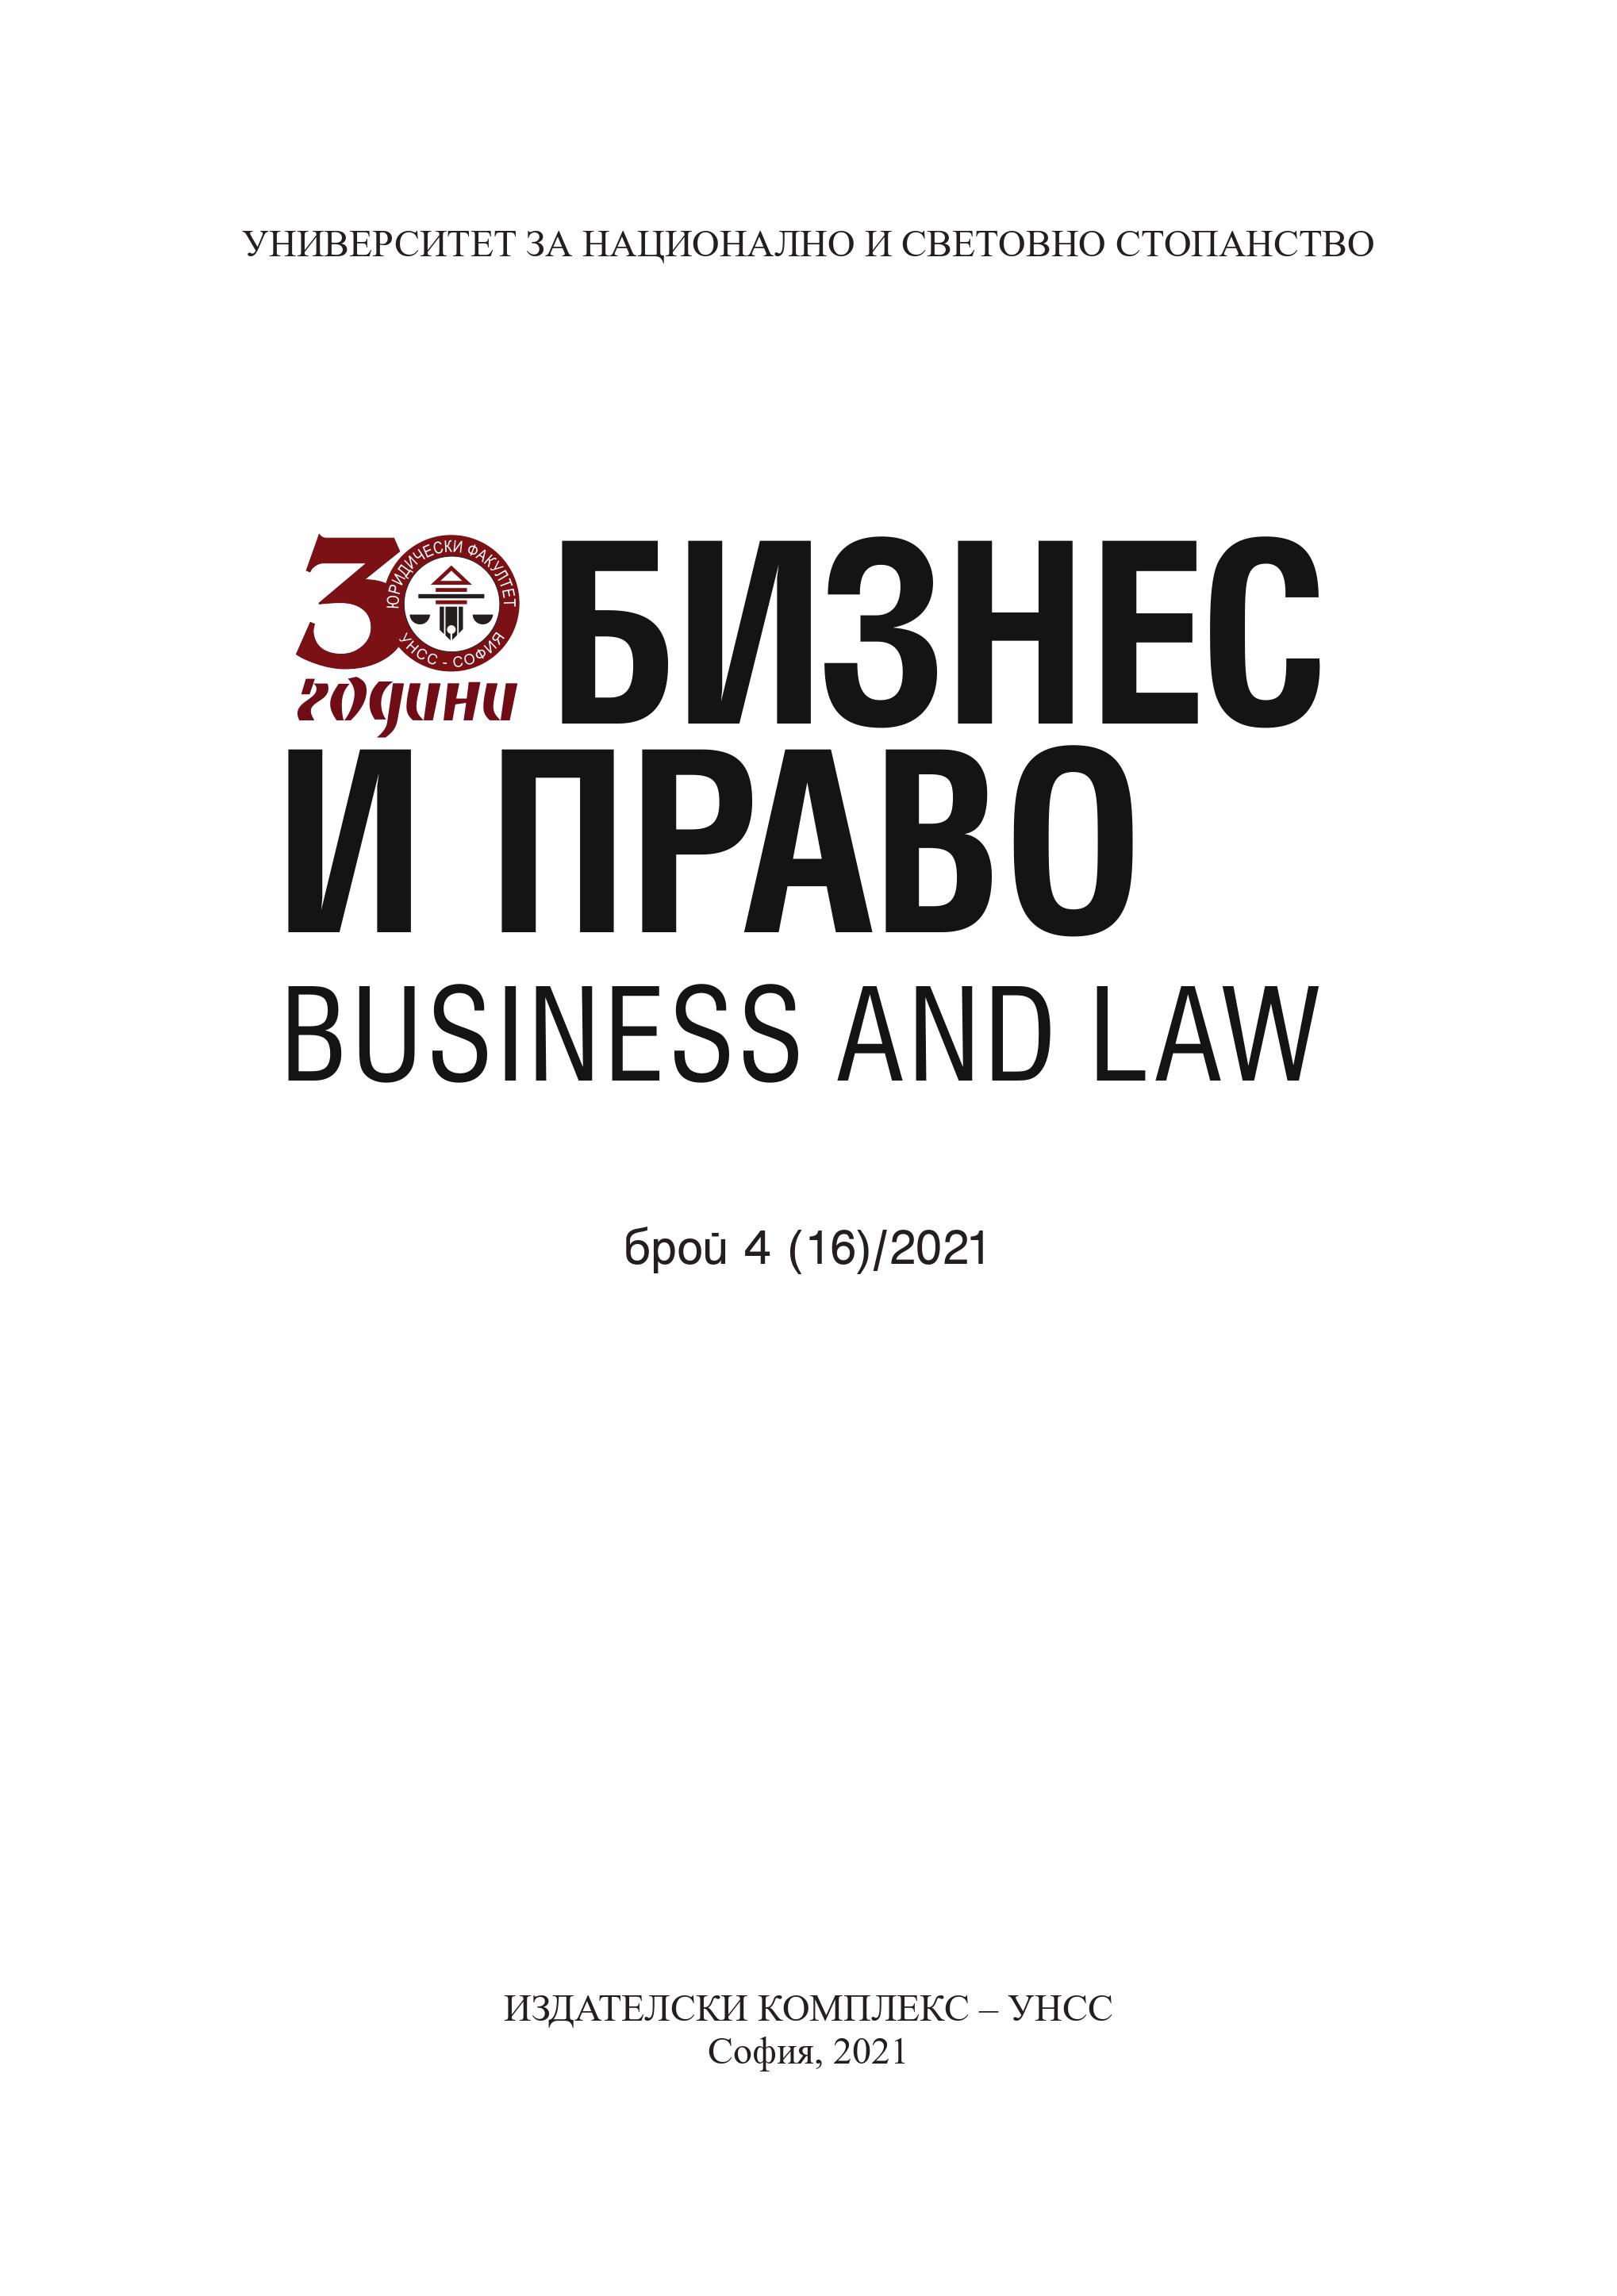 On Certain Cases of Unfair Conduct /Bad Faith/ Upon Execution of the Right to Withdraw from a Limited Liability Company under Art. 125, Para 2 of the Bulgarian Commerce Act Cover Image